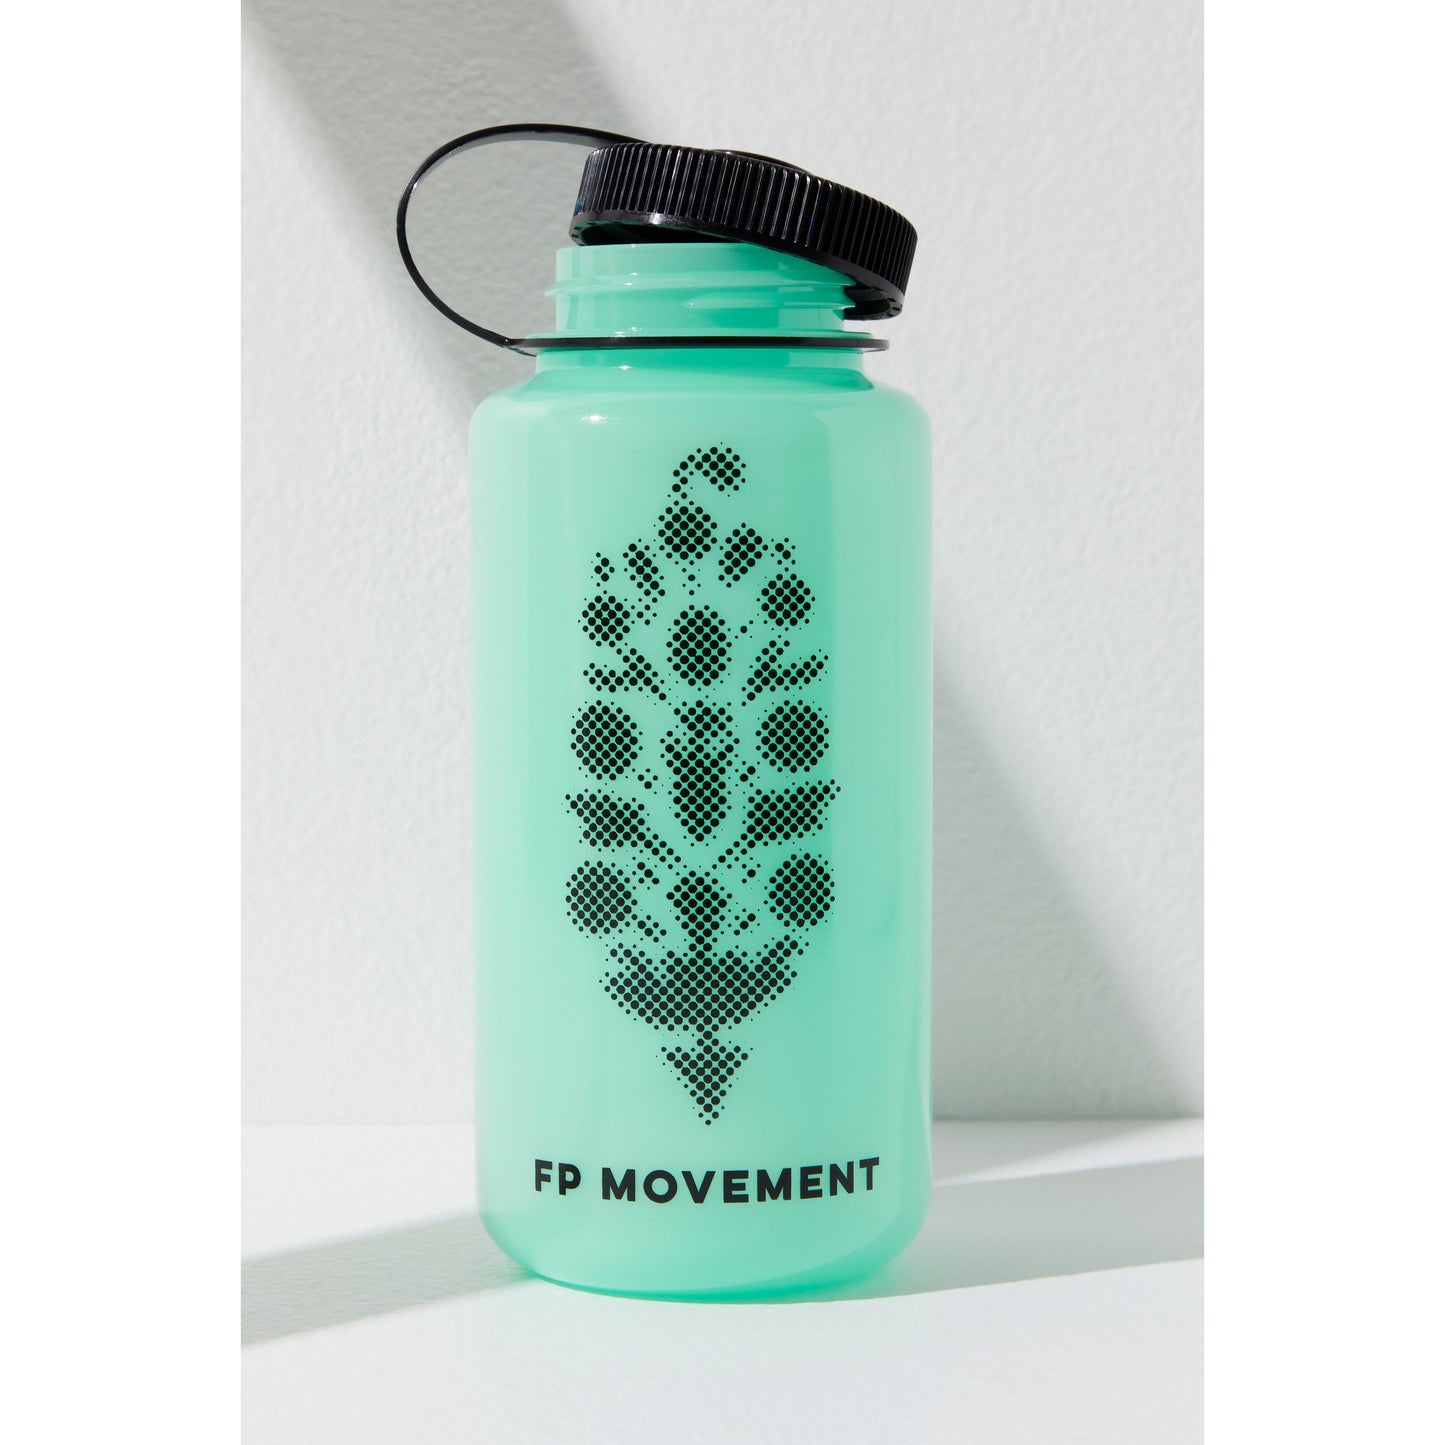 A mint green GITD water bottle with a black cap and a dotted paw print design, labeled "Free People Movement," against a white background with a soft shadow.